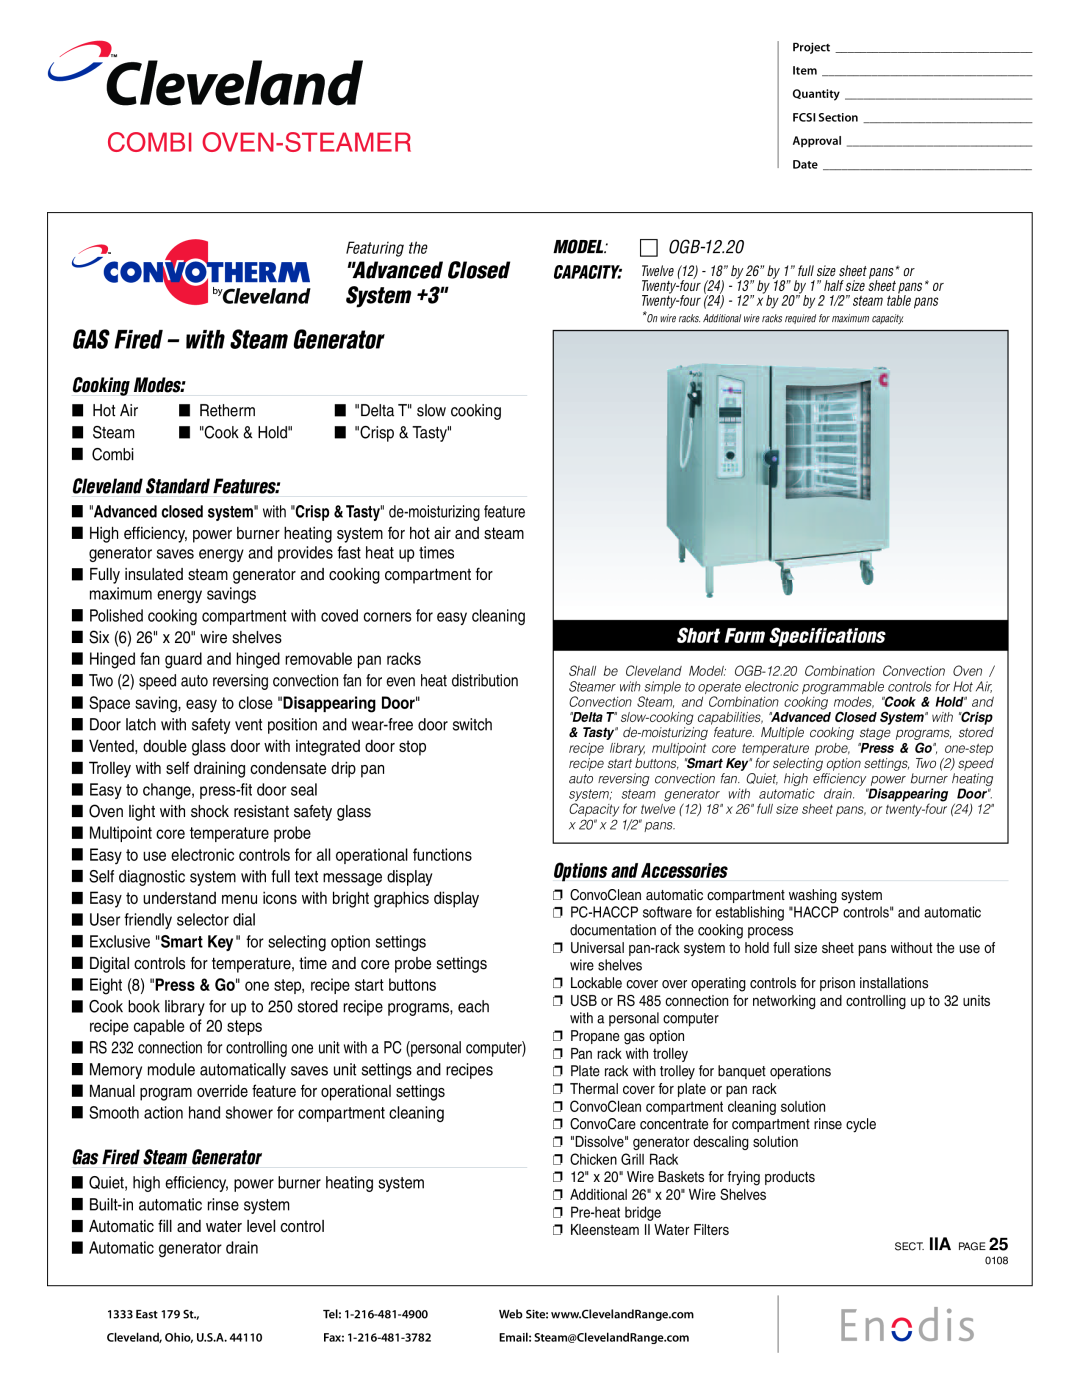 Cleveland Range OGB-12.20 specifications Cleveland, Combi Oven-Steamer, GAS Fired - with Steam Generator, Advanced Closed 